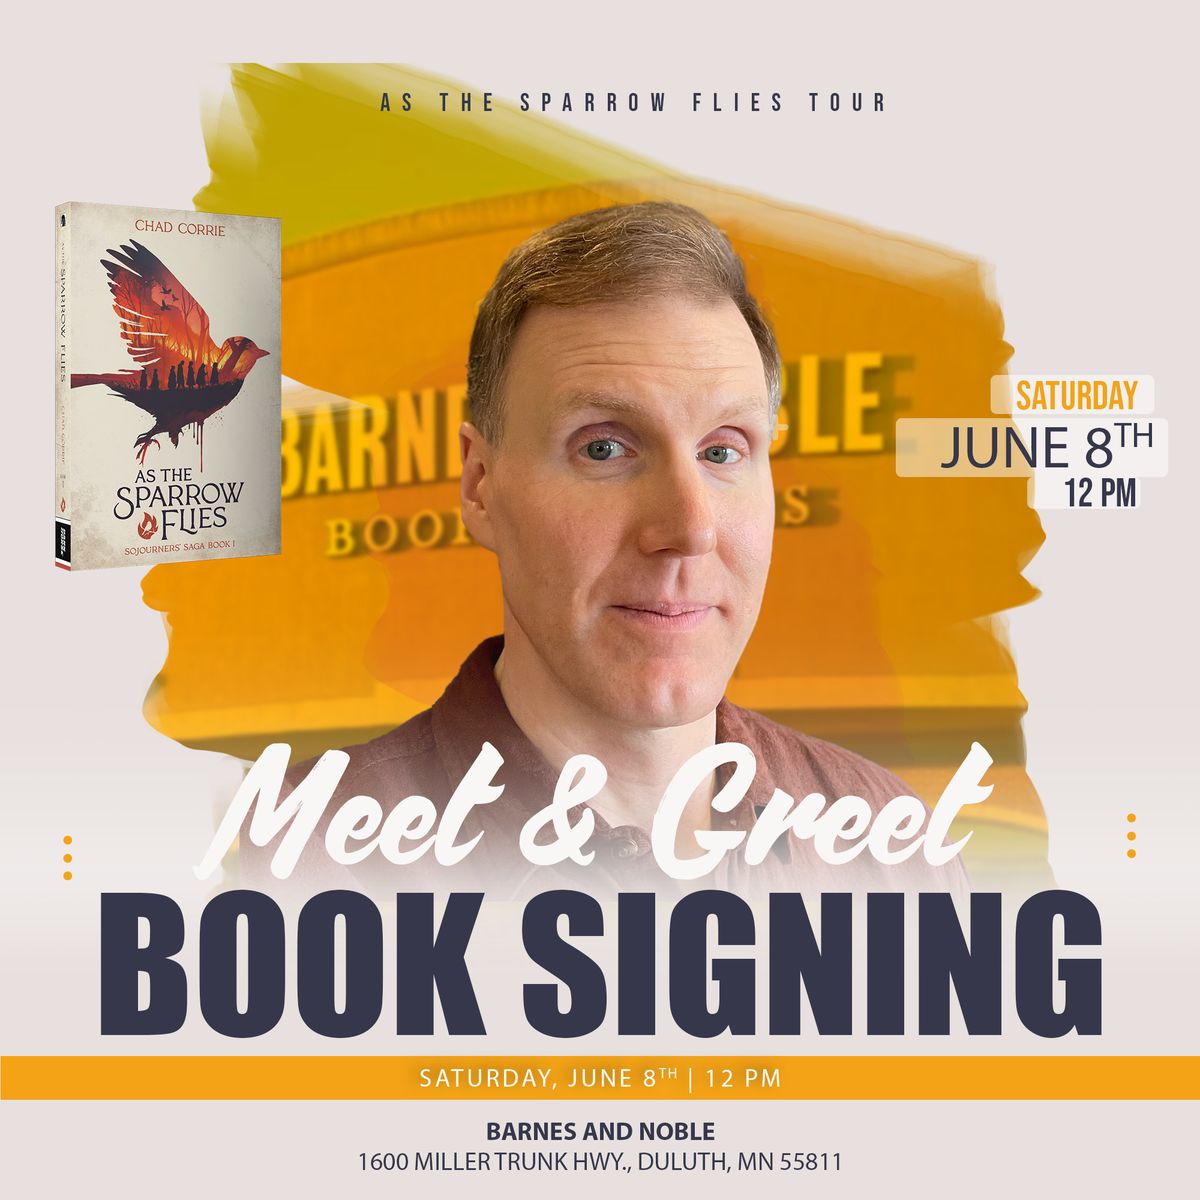 Chad Corrie Meet & Greet Booksigning